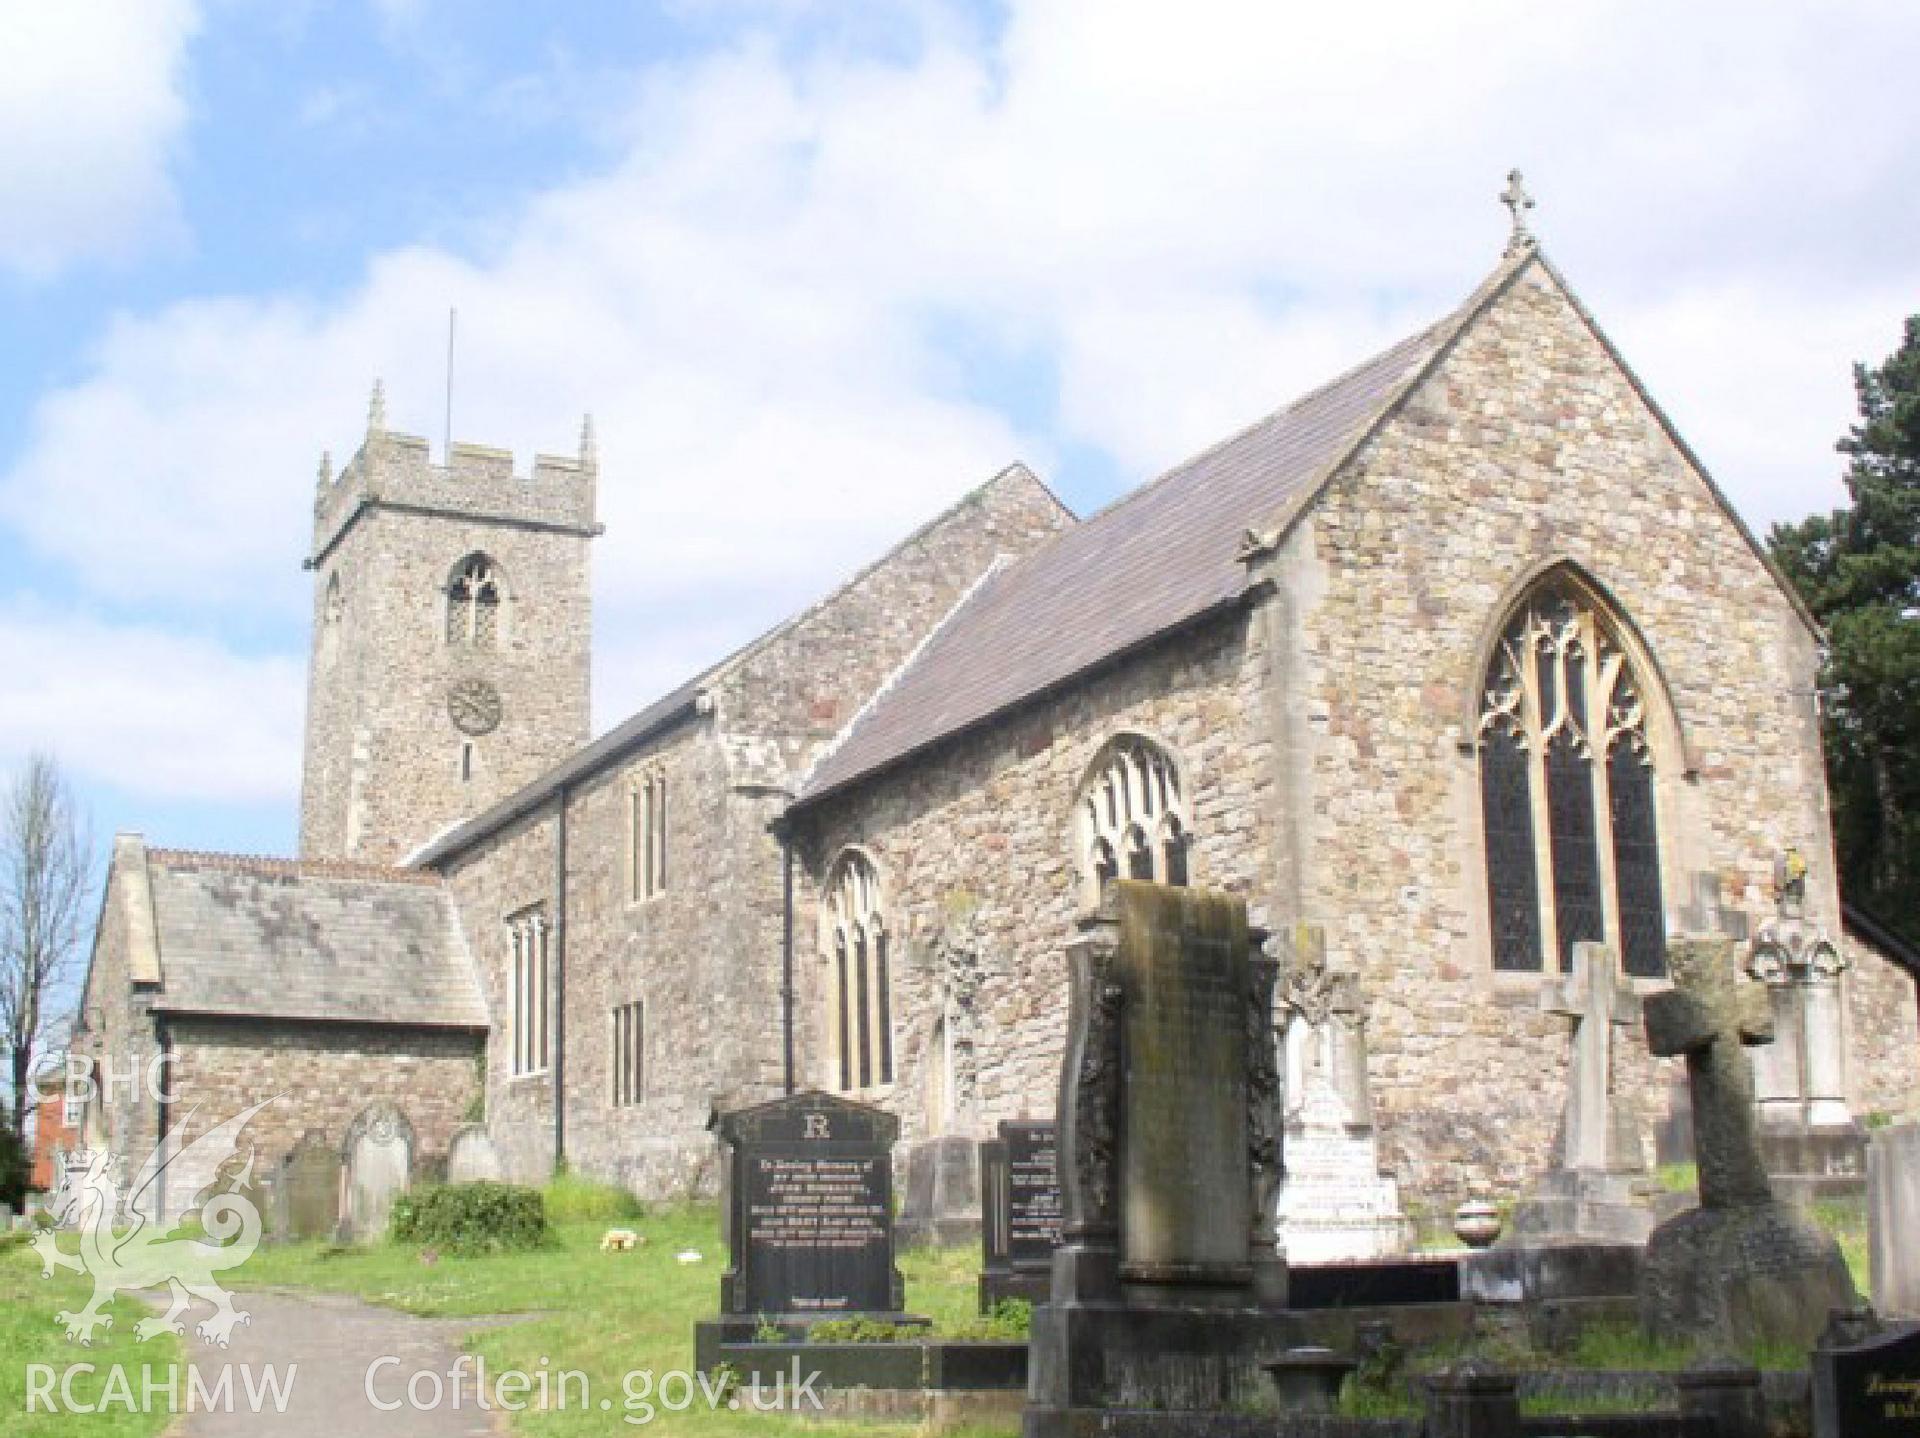 Colour digital photograph showing the exterior of St. Augustine's Church, Rumney; Cardiff.